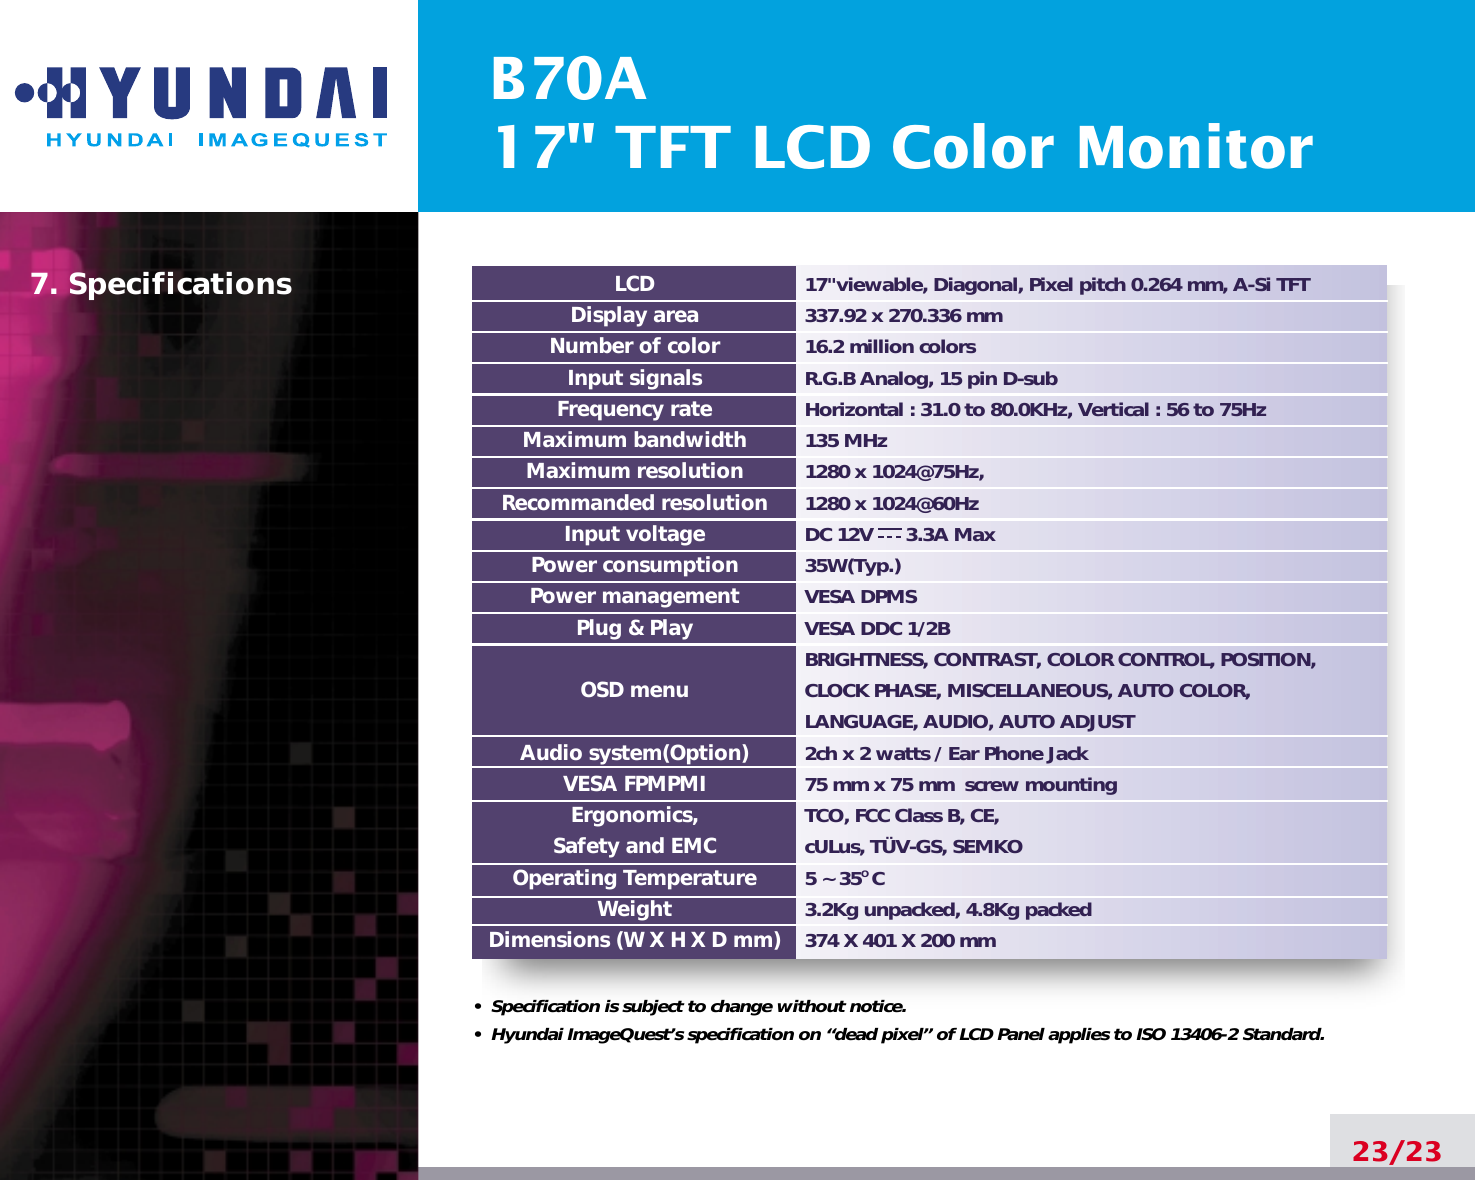 B70A17&quot; TFT LCD Color Monitor23/23LCDDisplay areaNumber of colorInput signalsFrequency rateMaximum bandwidthMaximum resolutionRecommanded resolutionInput voltagePower consumptionPower managementPlug &amp; PlayOSD menuAudio system(Option)VESA FPMPMIErgonomics,Safety and EMCOperating TemperatureWeightDimensions (W X H X D mm)•  Specification is subject to change without notice.•  Hyundai ImageQuest’s specification on “dead pixel” of LCD Panel applies to ISO 13406-2 Standard.7. Specifications17&quot;viewable, Diagonal, Pixel pitch 0.264 mm, A-Si TFT337.92 x 270.336 mm16.2 million colorsR.G.B Analog, 15 pin D-subHorizontal : 31.0 to 80.0KHz, Vertical : 56 to 75Hz135 MHz1280 x 1024@75Hz, 1280 x 1024@60HzDC 12V      3.3A Max35W(Typ.)VESA DPMSVESA DDC 1/2BBRIGHTNESS, CONTRAST, COLOR CONTROL, POSITION, CLOCK PHASE, MISCELLANEOUS, AUTO COLOR, LANGUAGE, AUDIO, AUTO ADJUST2ch x 2 watts / Ear Phone Jack75 mm x 75 mm  screw mountingTCO, FCC Class B, CE,cULus, TÜV-GS, SEMKO5 ~ 35O C3.2Kg unpacked, 4.8Kg packed374 X 401 X 200 mm